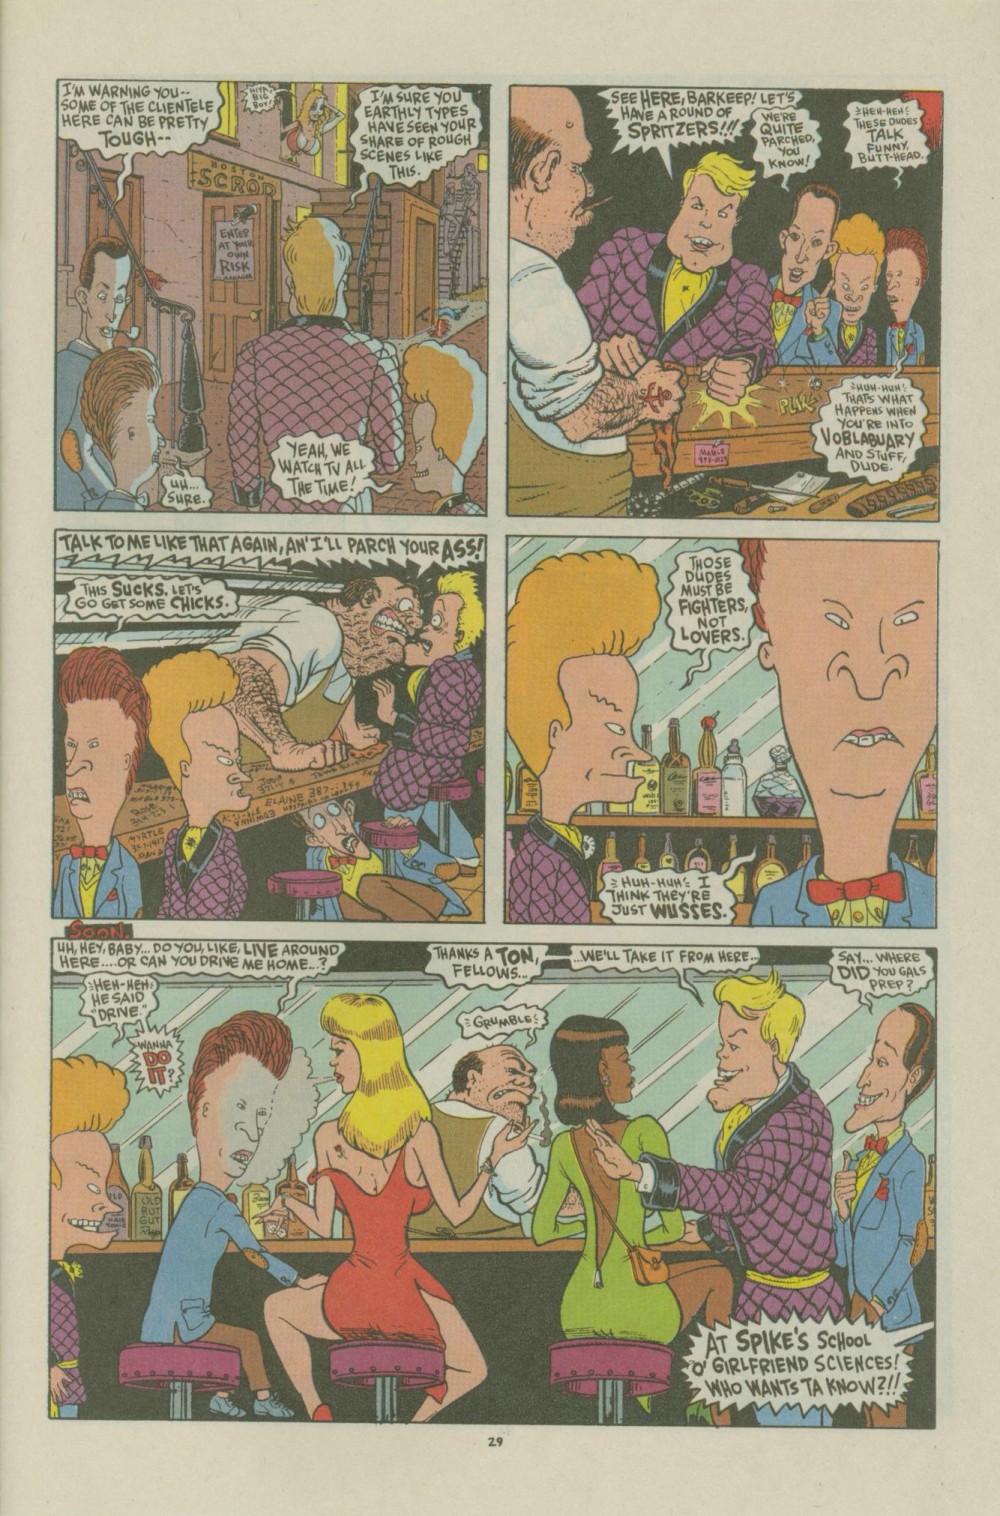 Beavis and Butt-Head 15 Page 29